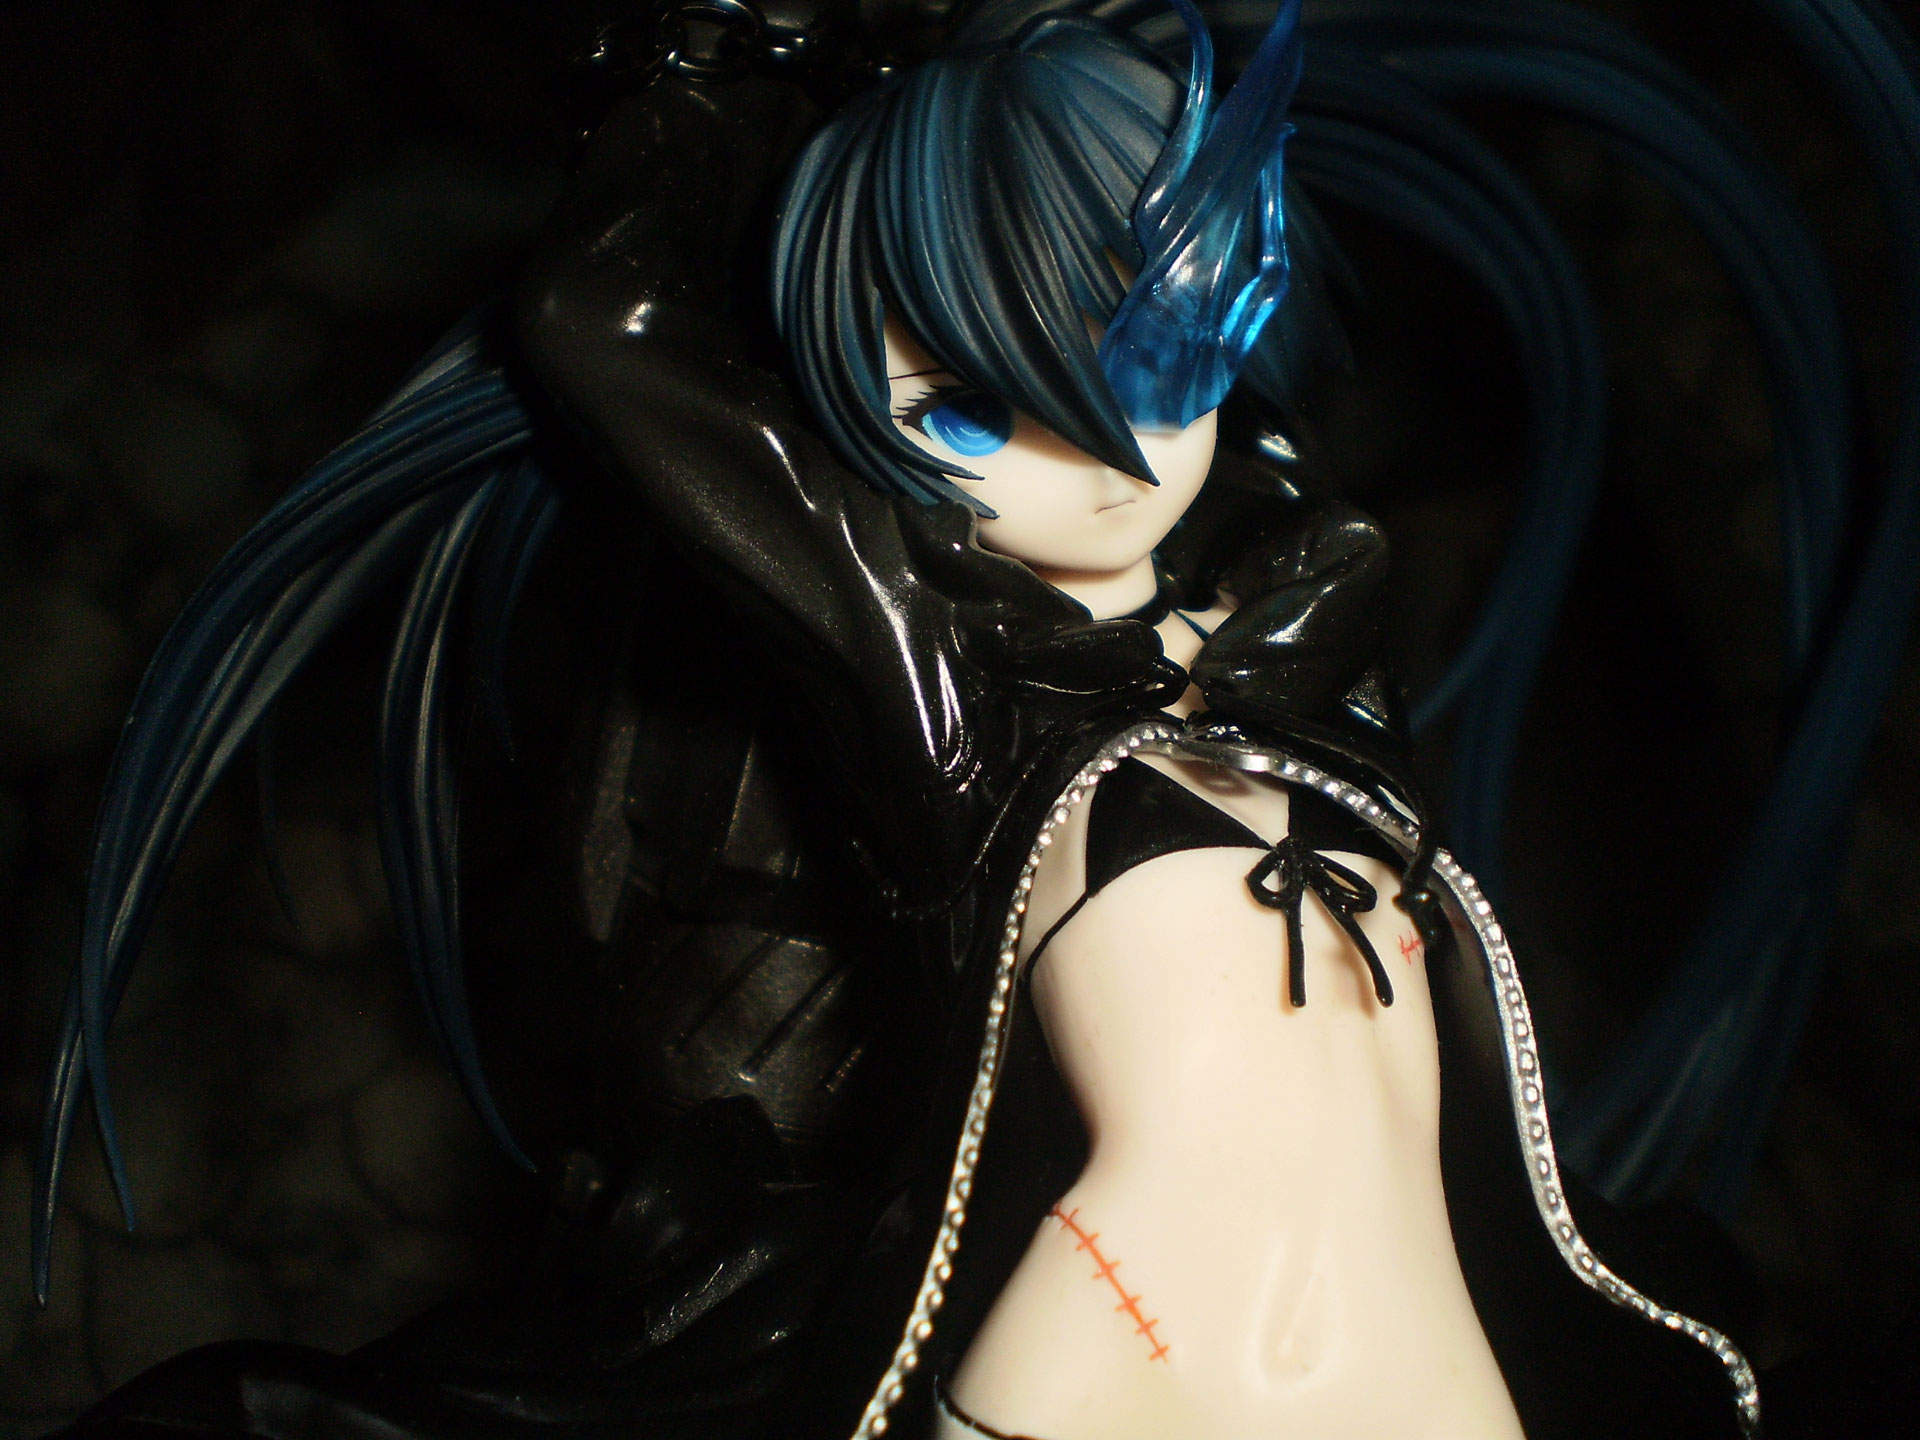 the other self of Kuroi Mato [Black&#9733;Rock Shooter]
http://www.hlj.com/product/GSC96525